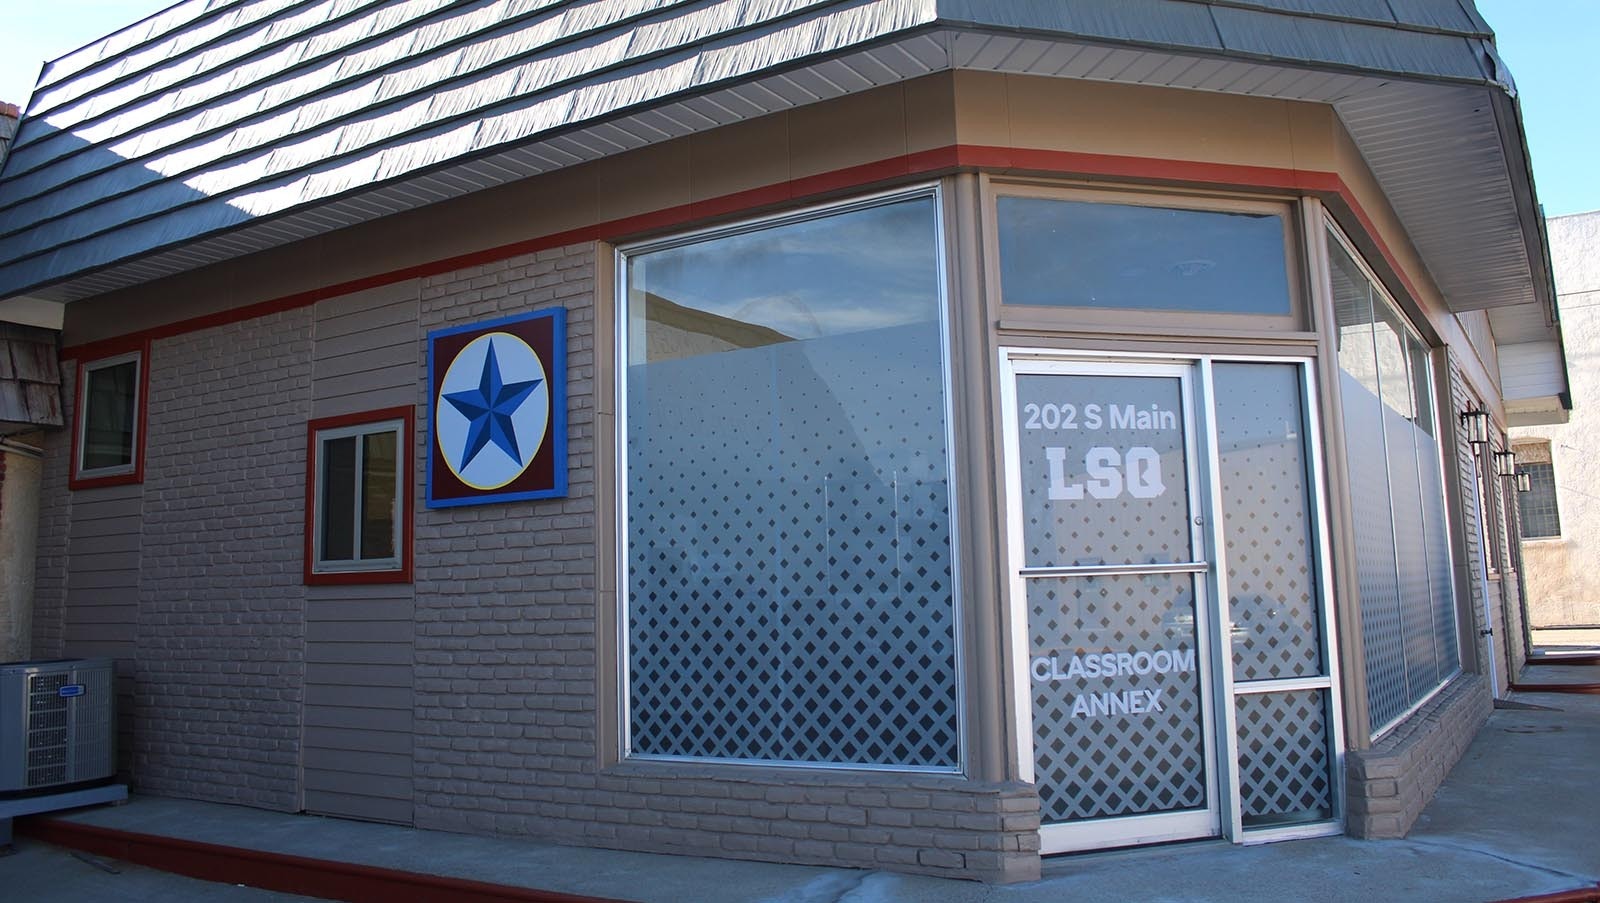 Karen Wisseman has renovated an old Texaco into an extension of her quilting mission.